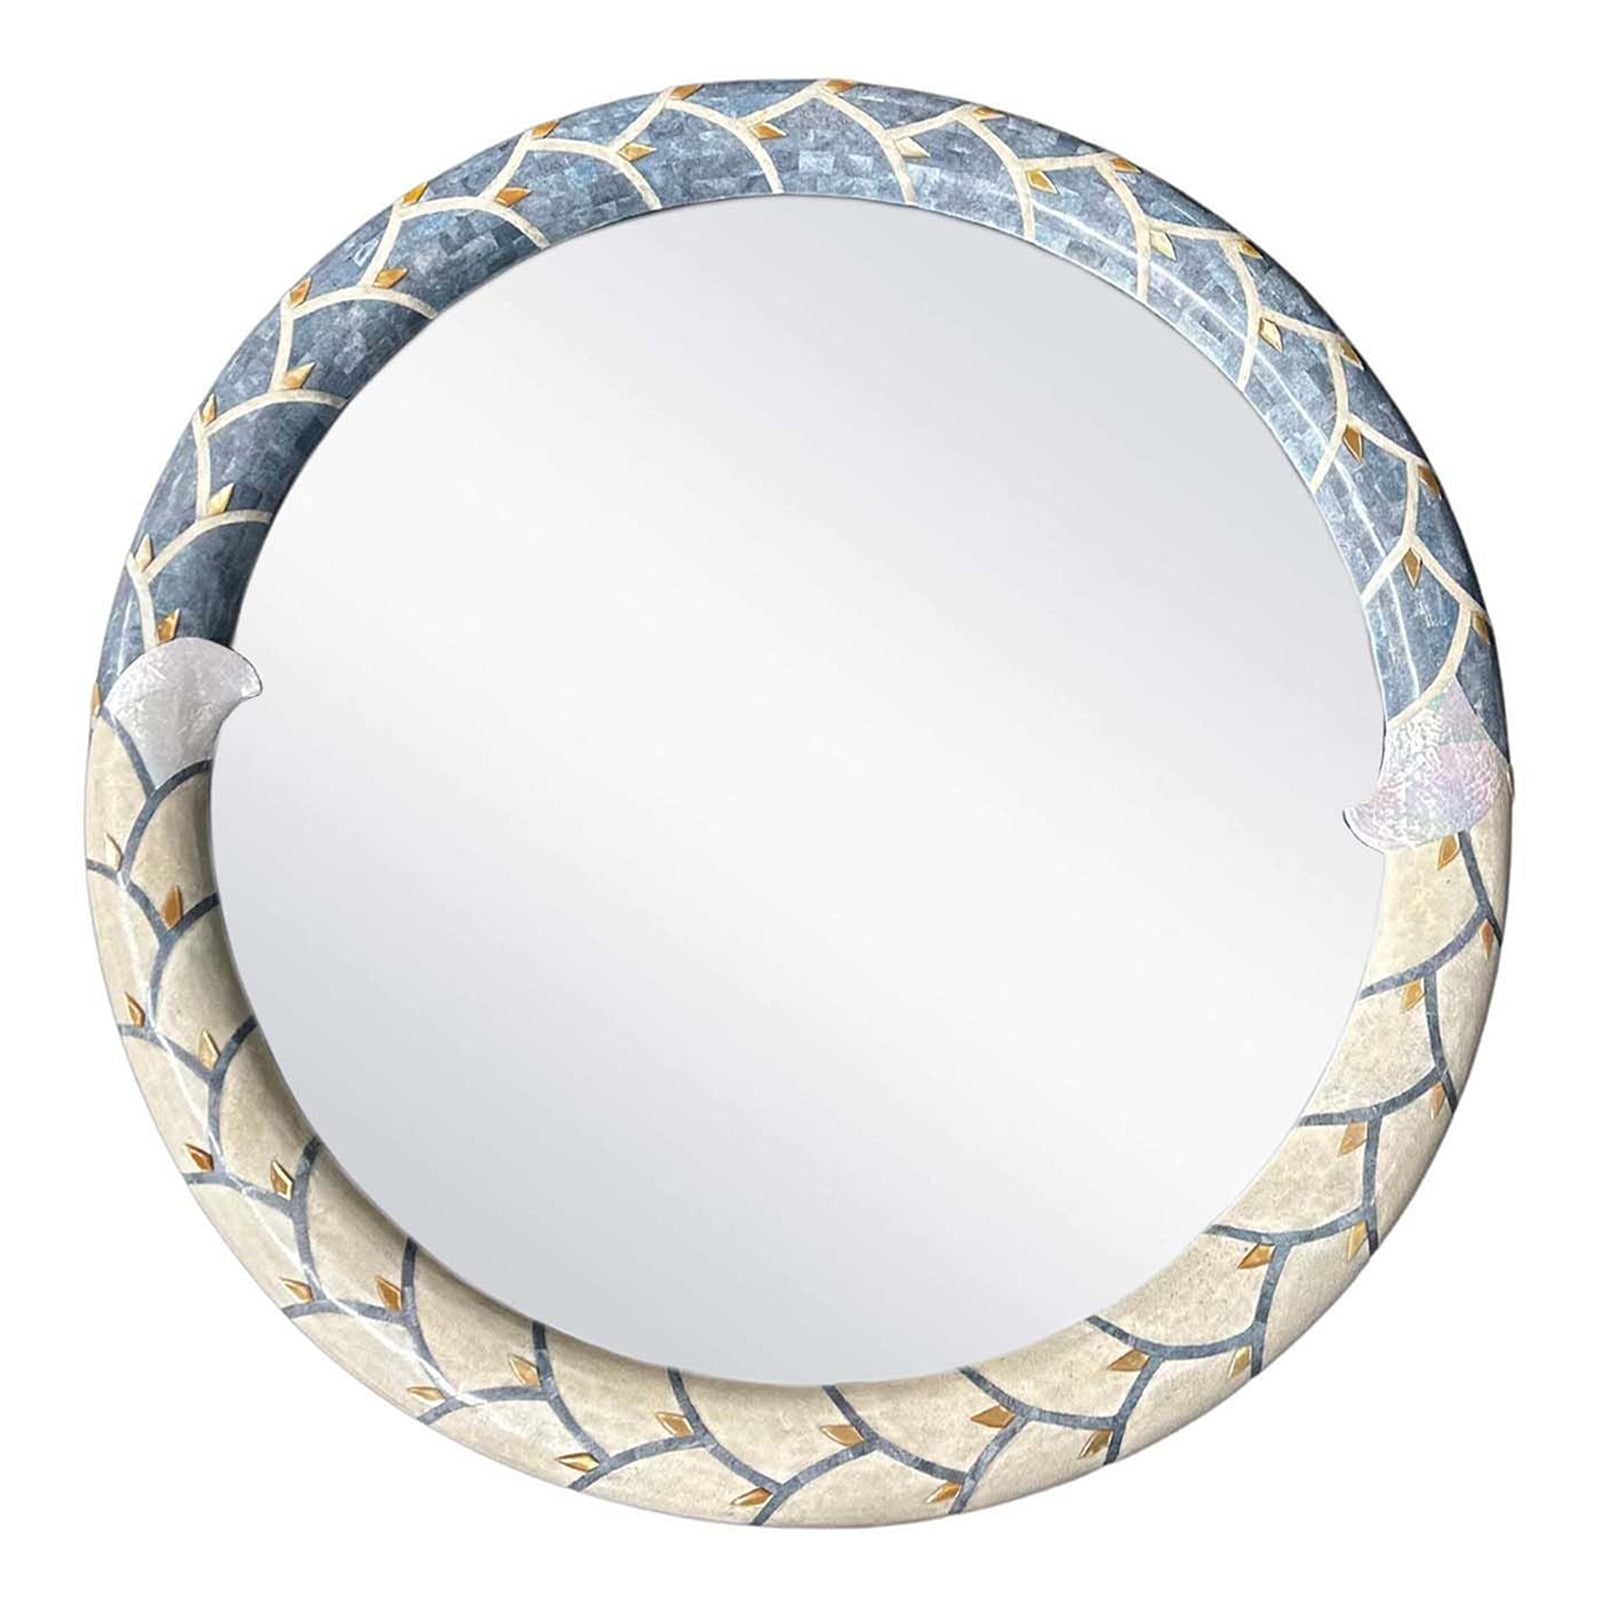 Oversized Vintage Shagreen & Mother of Pearl Mirror by Muramasa Kudo For Sale